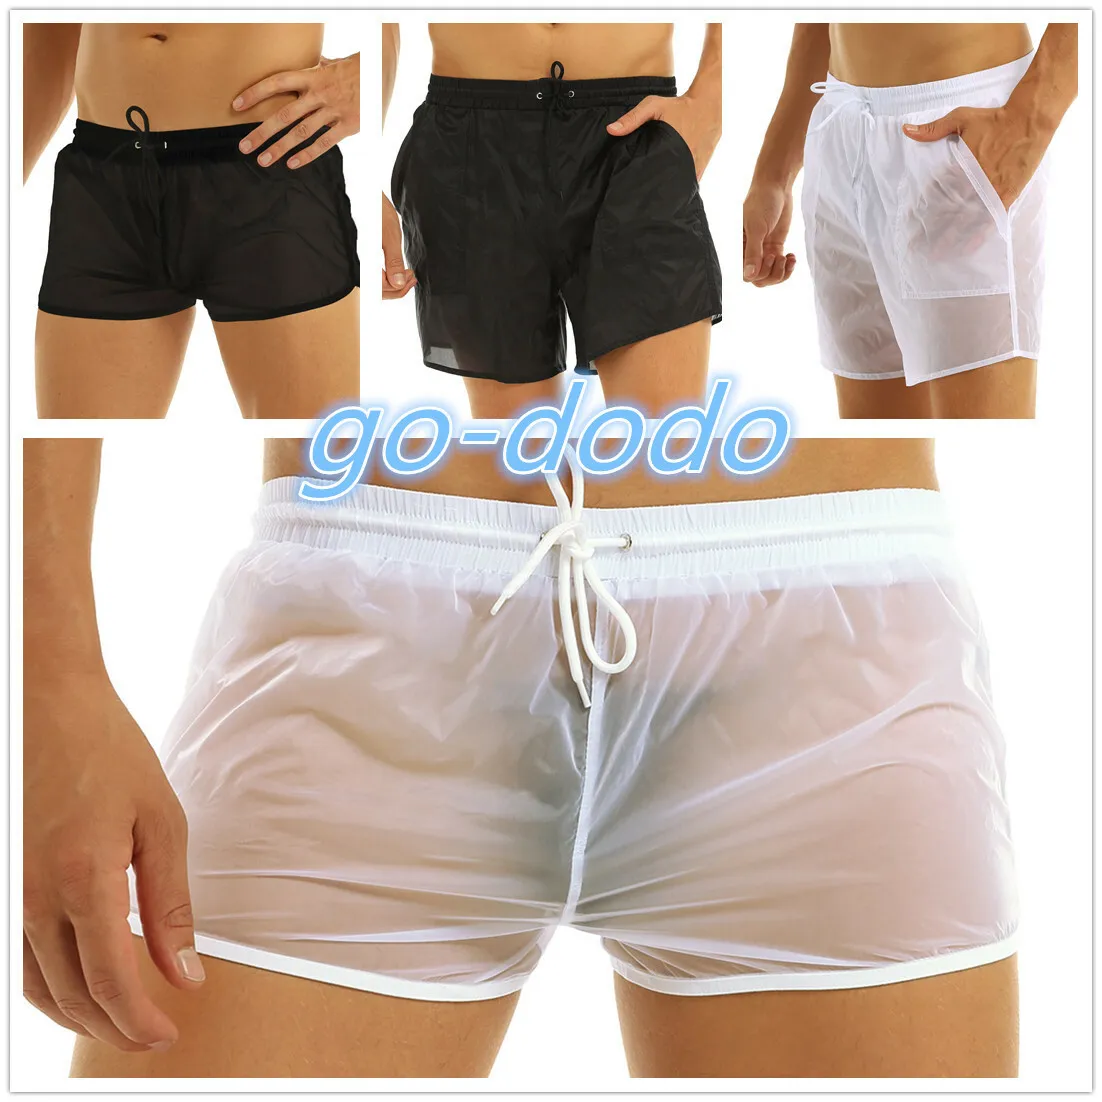 bob seeger recommends men in see thru shorts pic